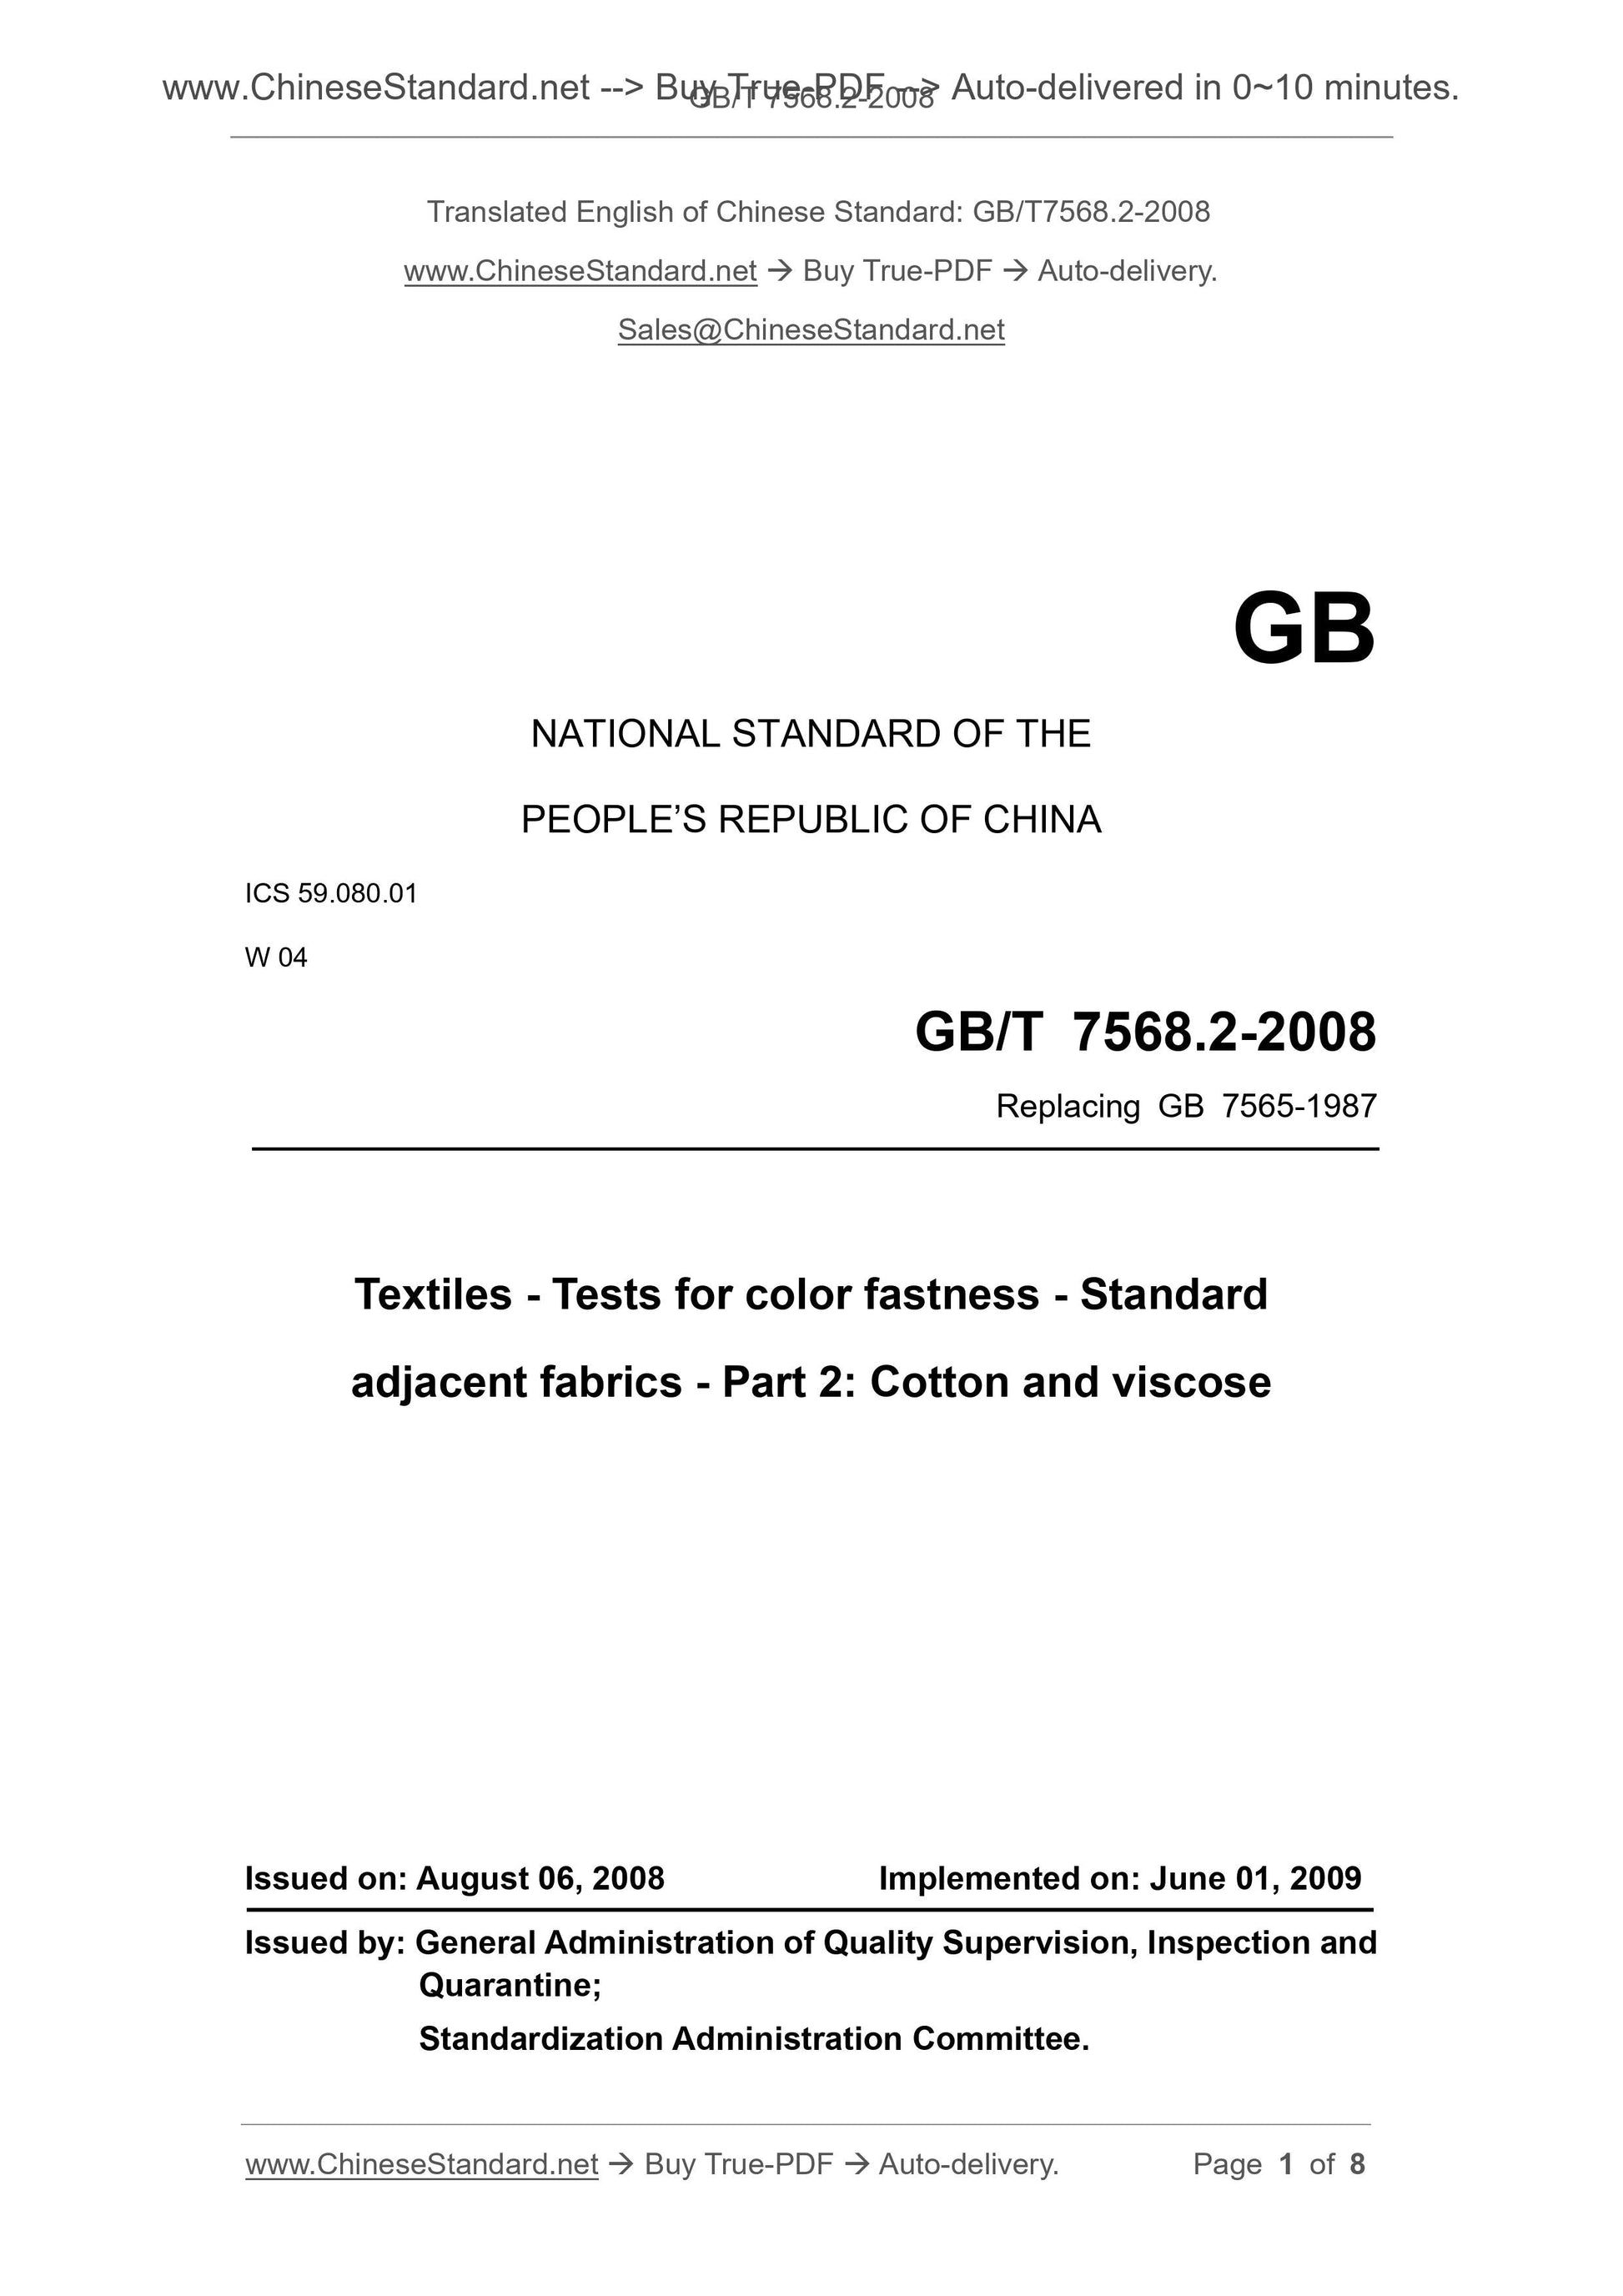 GB/T 7568.2-2008 Page 1